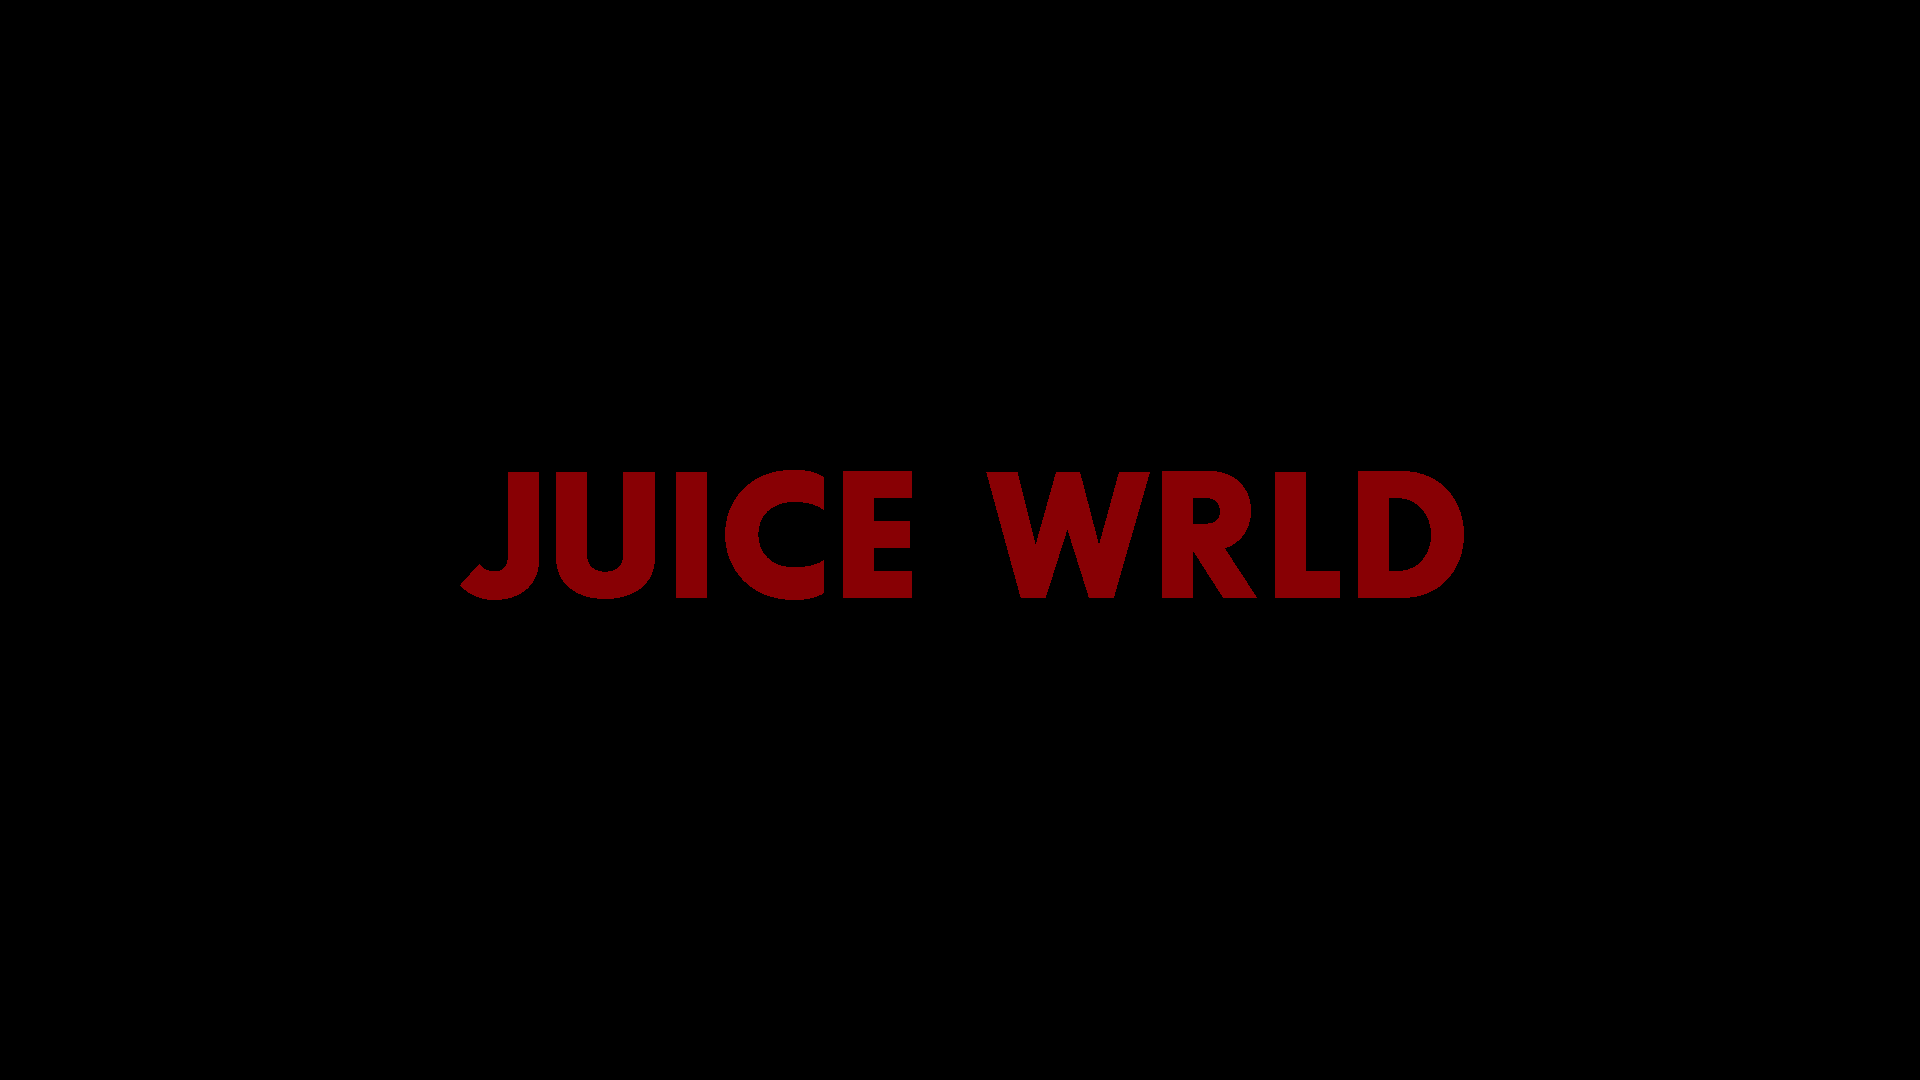 Juice WRLD 999 wallpaper by LilBlue242  Download on ZEDGE  415c